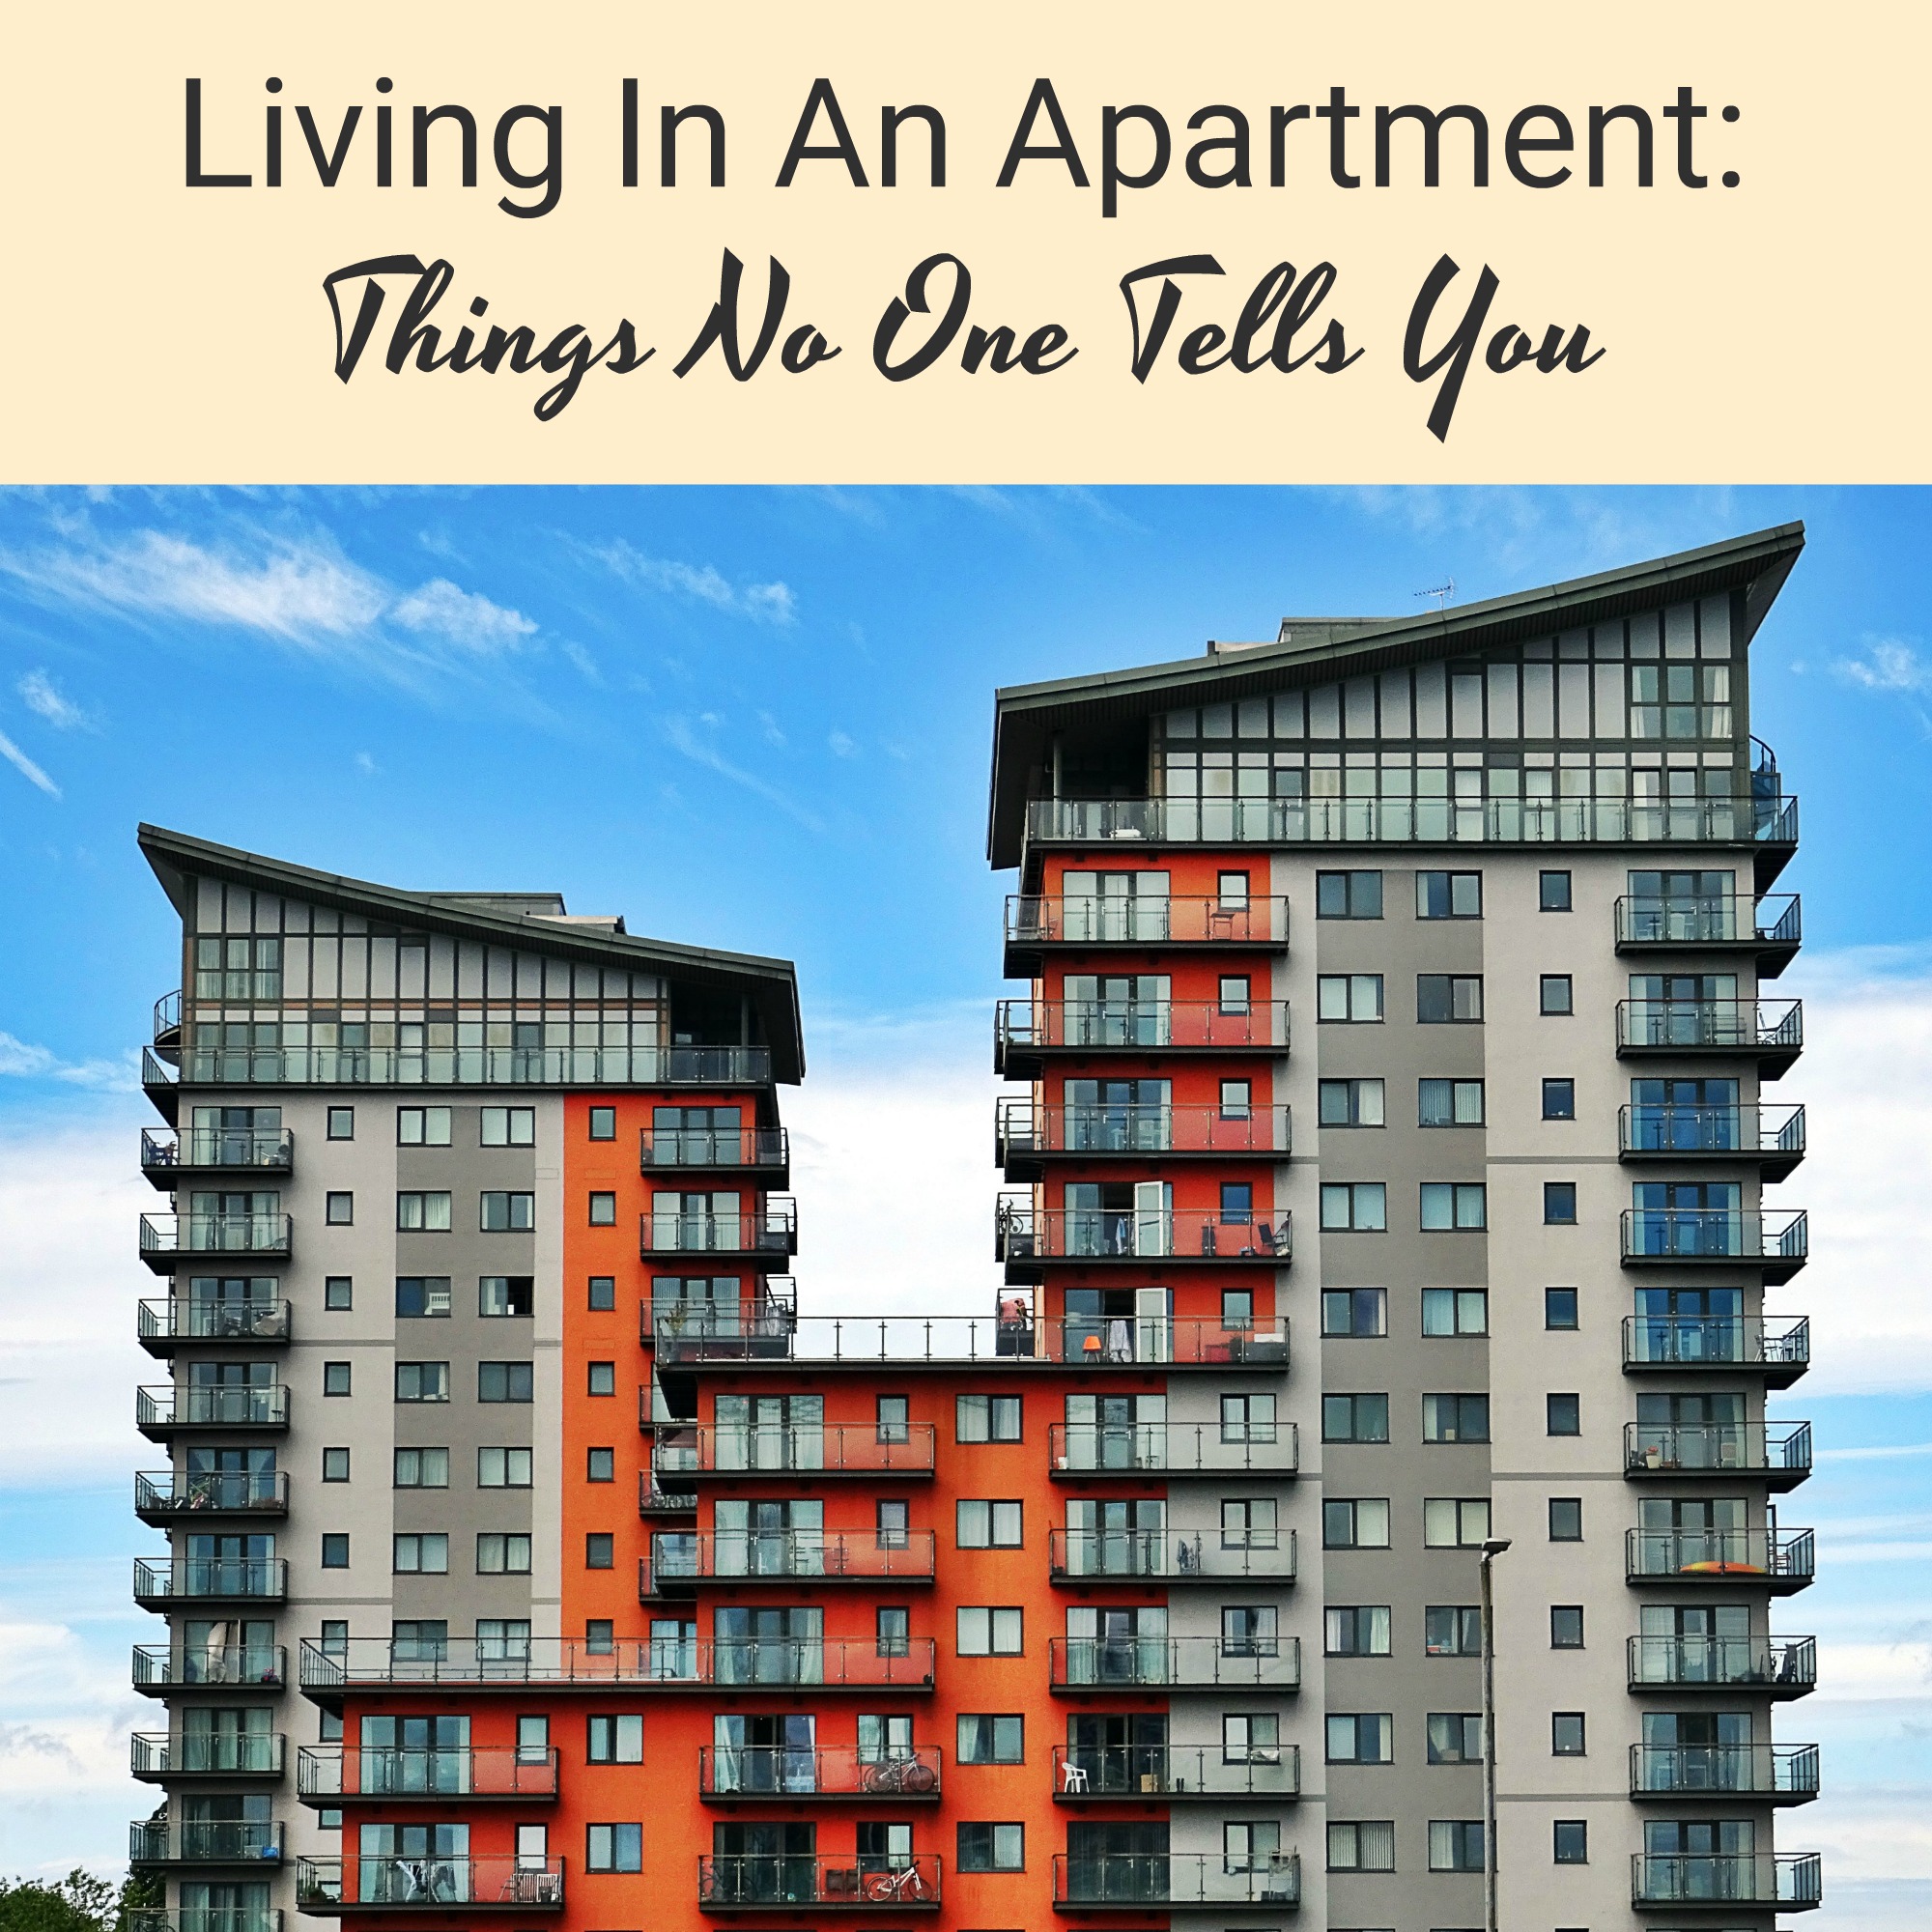 Living In An Apartment: Things No One Tells You